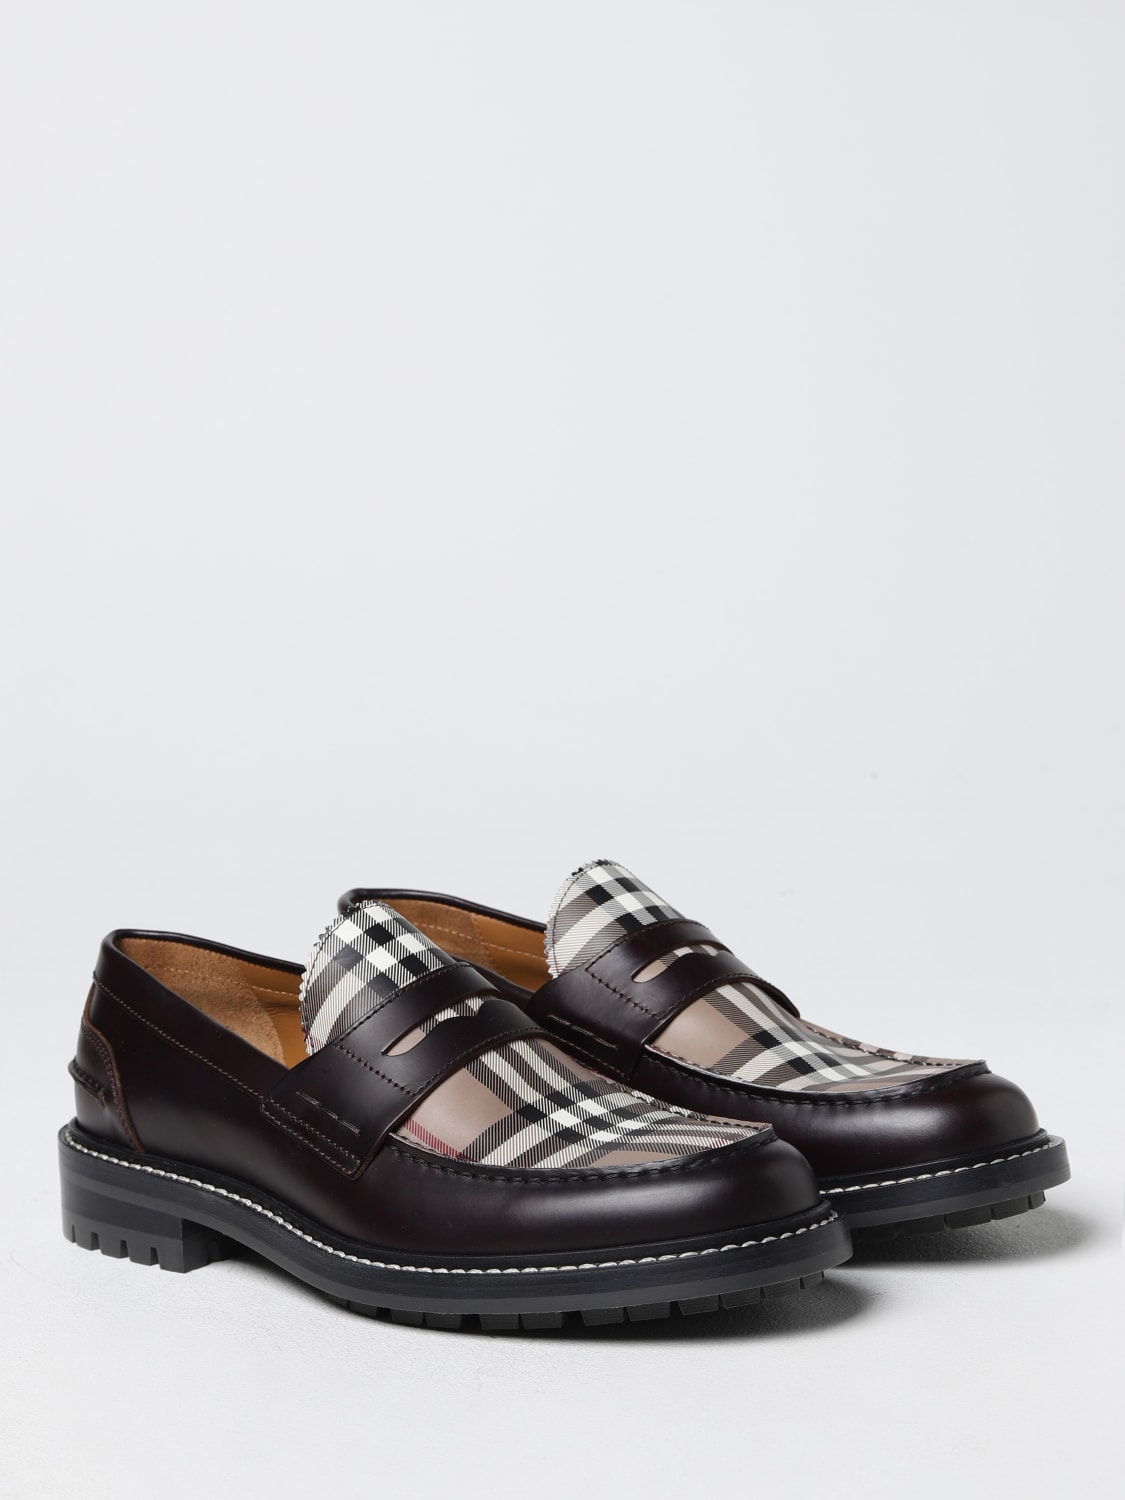 Fred loafer in leather - Black loafers 8062439 online at GIGLIO.COM